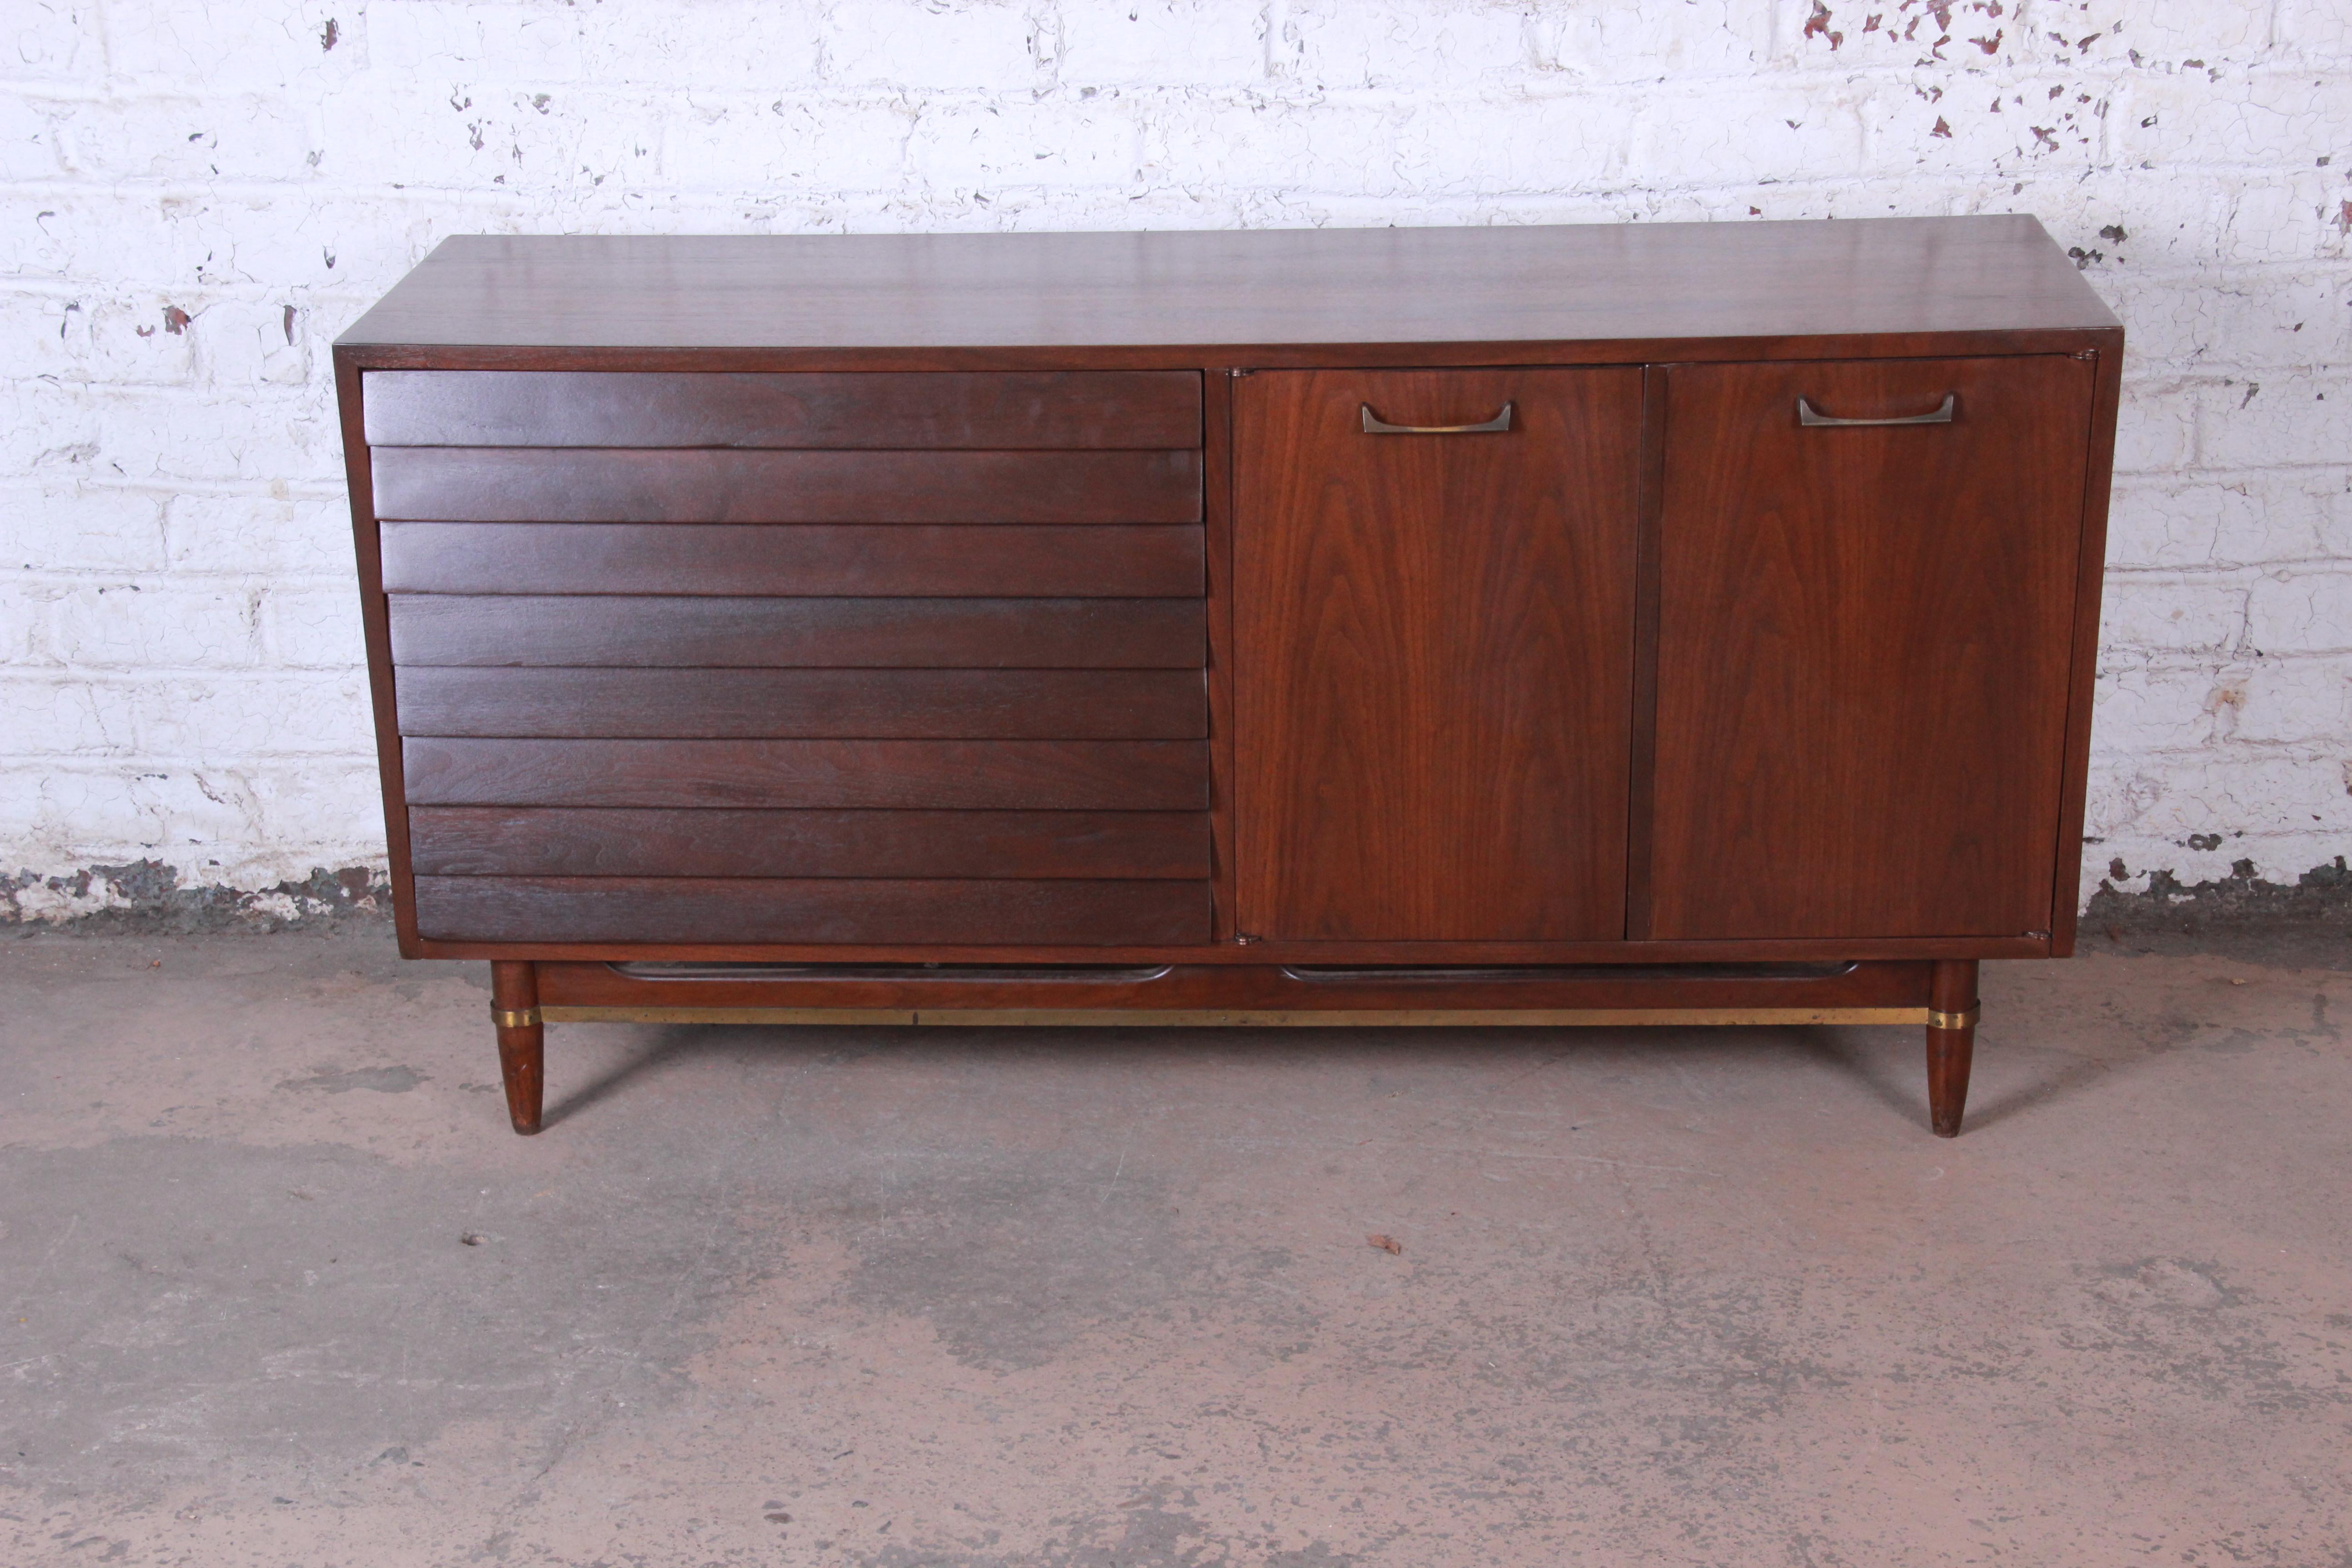 A nice Mid-Century Modern louvered front sideboard credenza by Merton Gershun for American of Martinsville. This popular design has louvered drawers, brass pulls, and brass trim. The right cabinet doors open to reveal three drawers and a cabinet